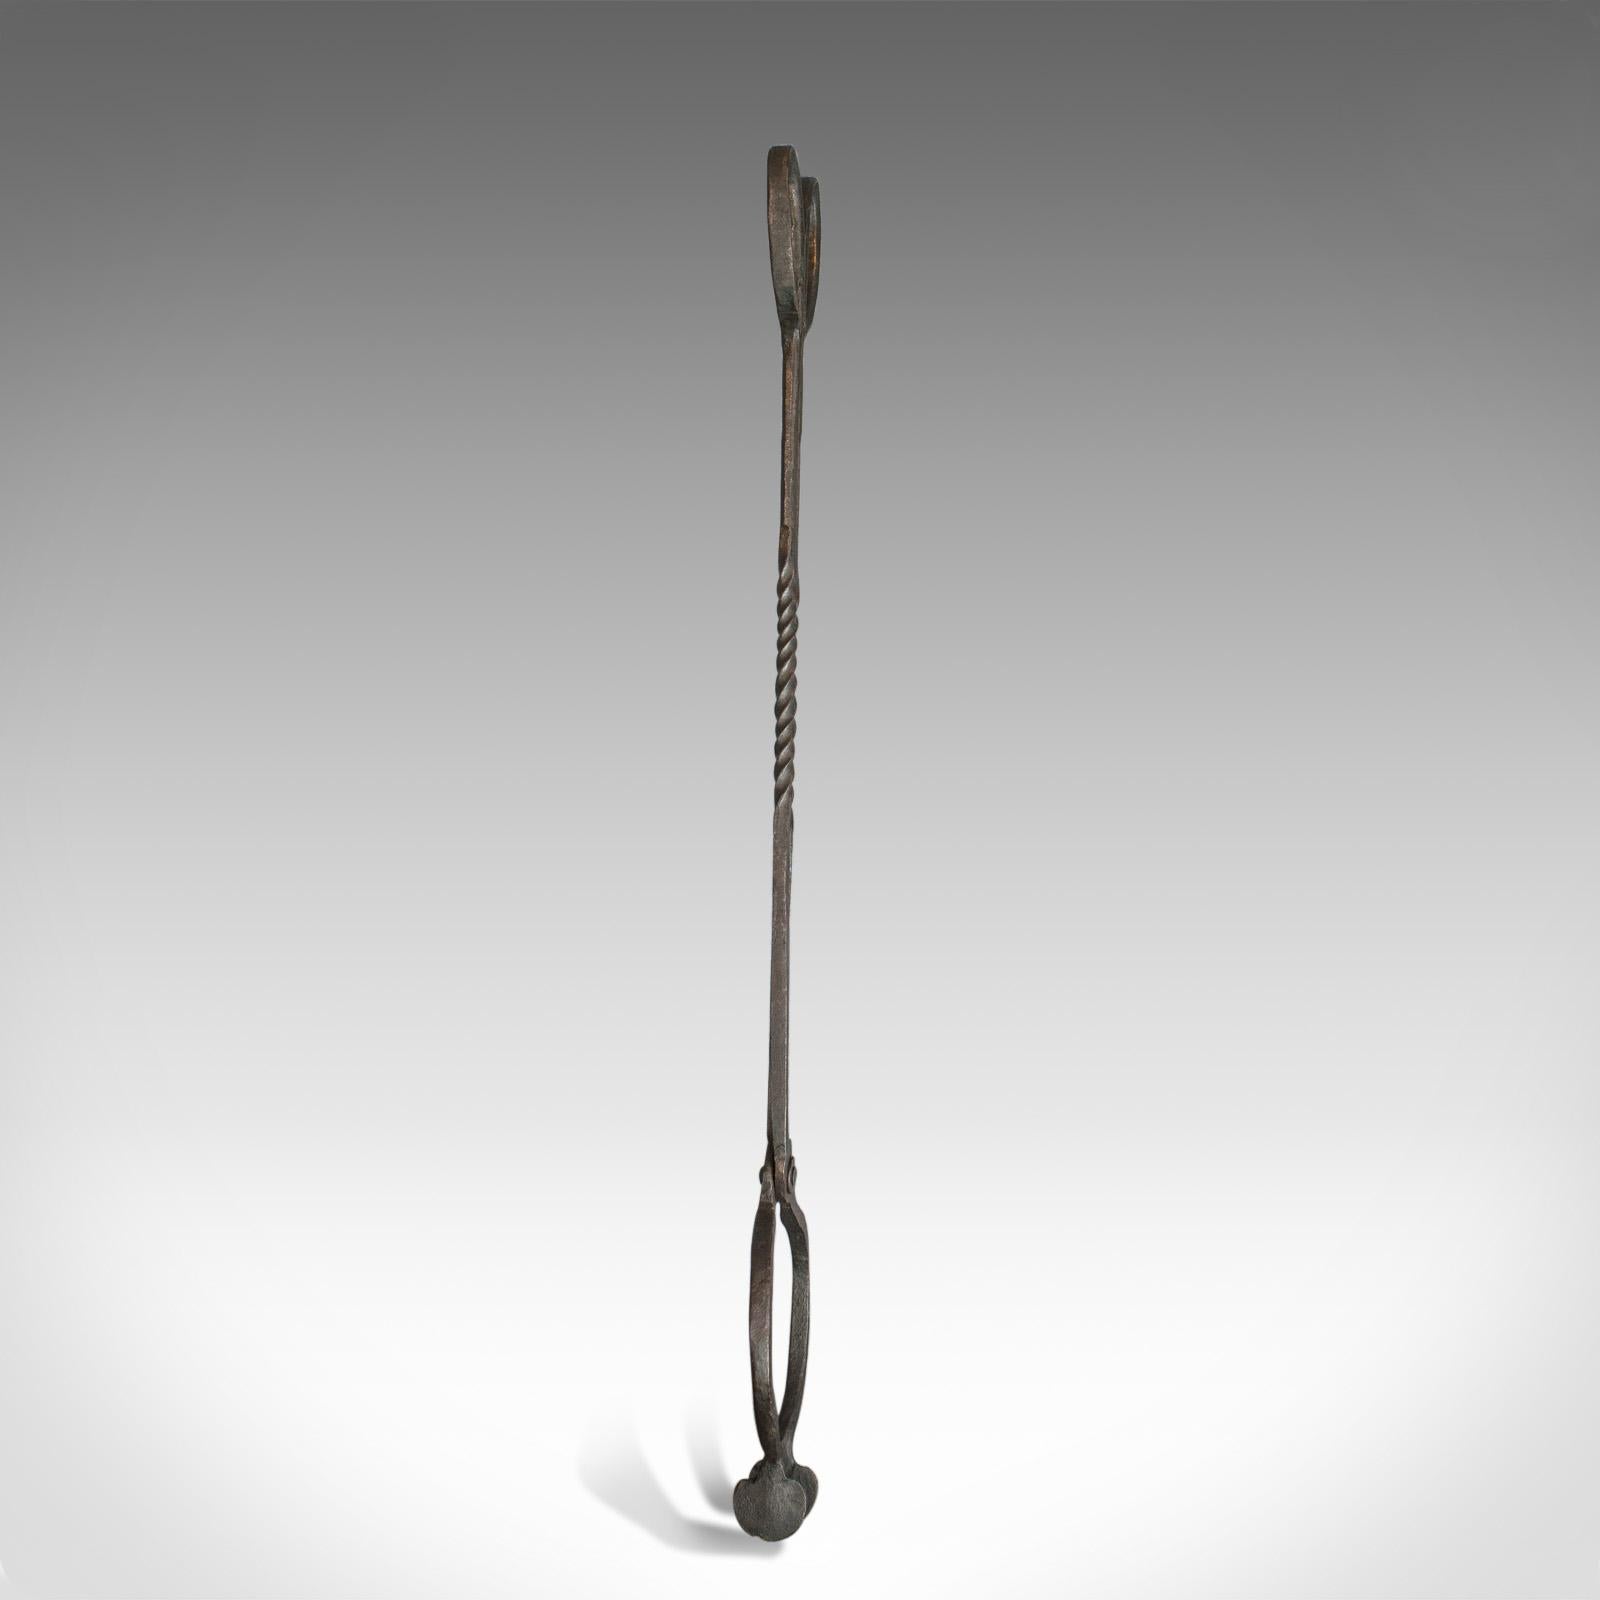 English Antique Pair of Large Fire Tongs, Georgian, Hand Forged, Stirrup, circa 1800